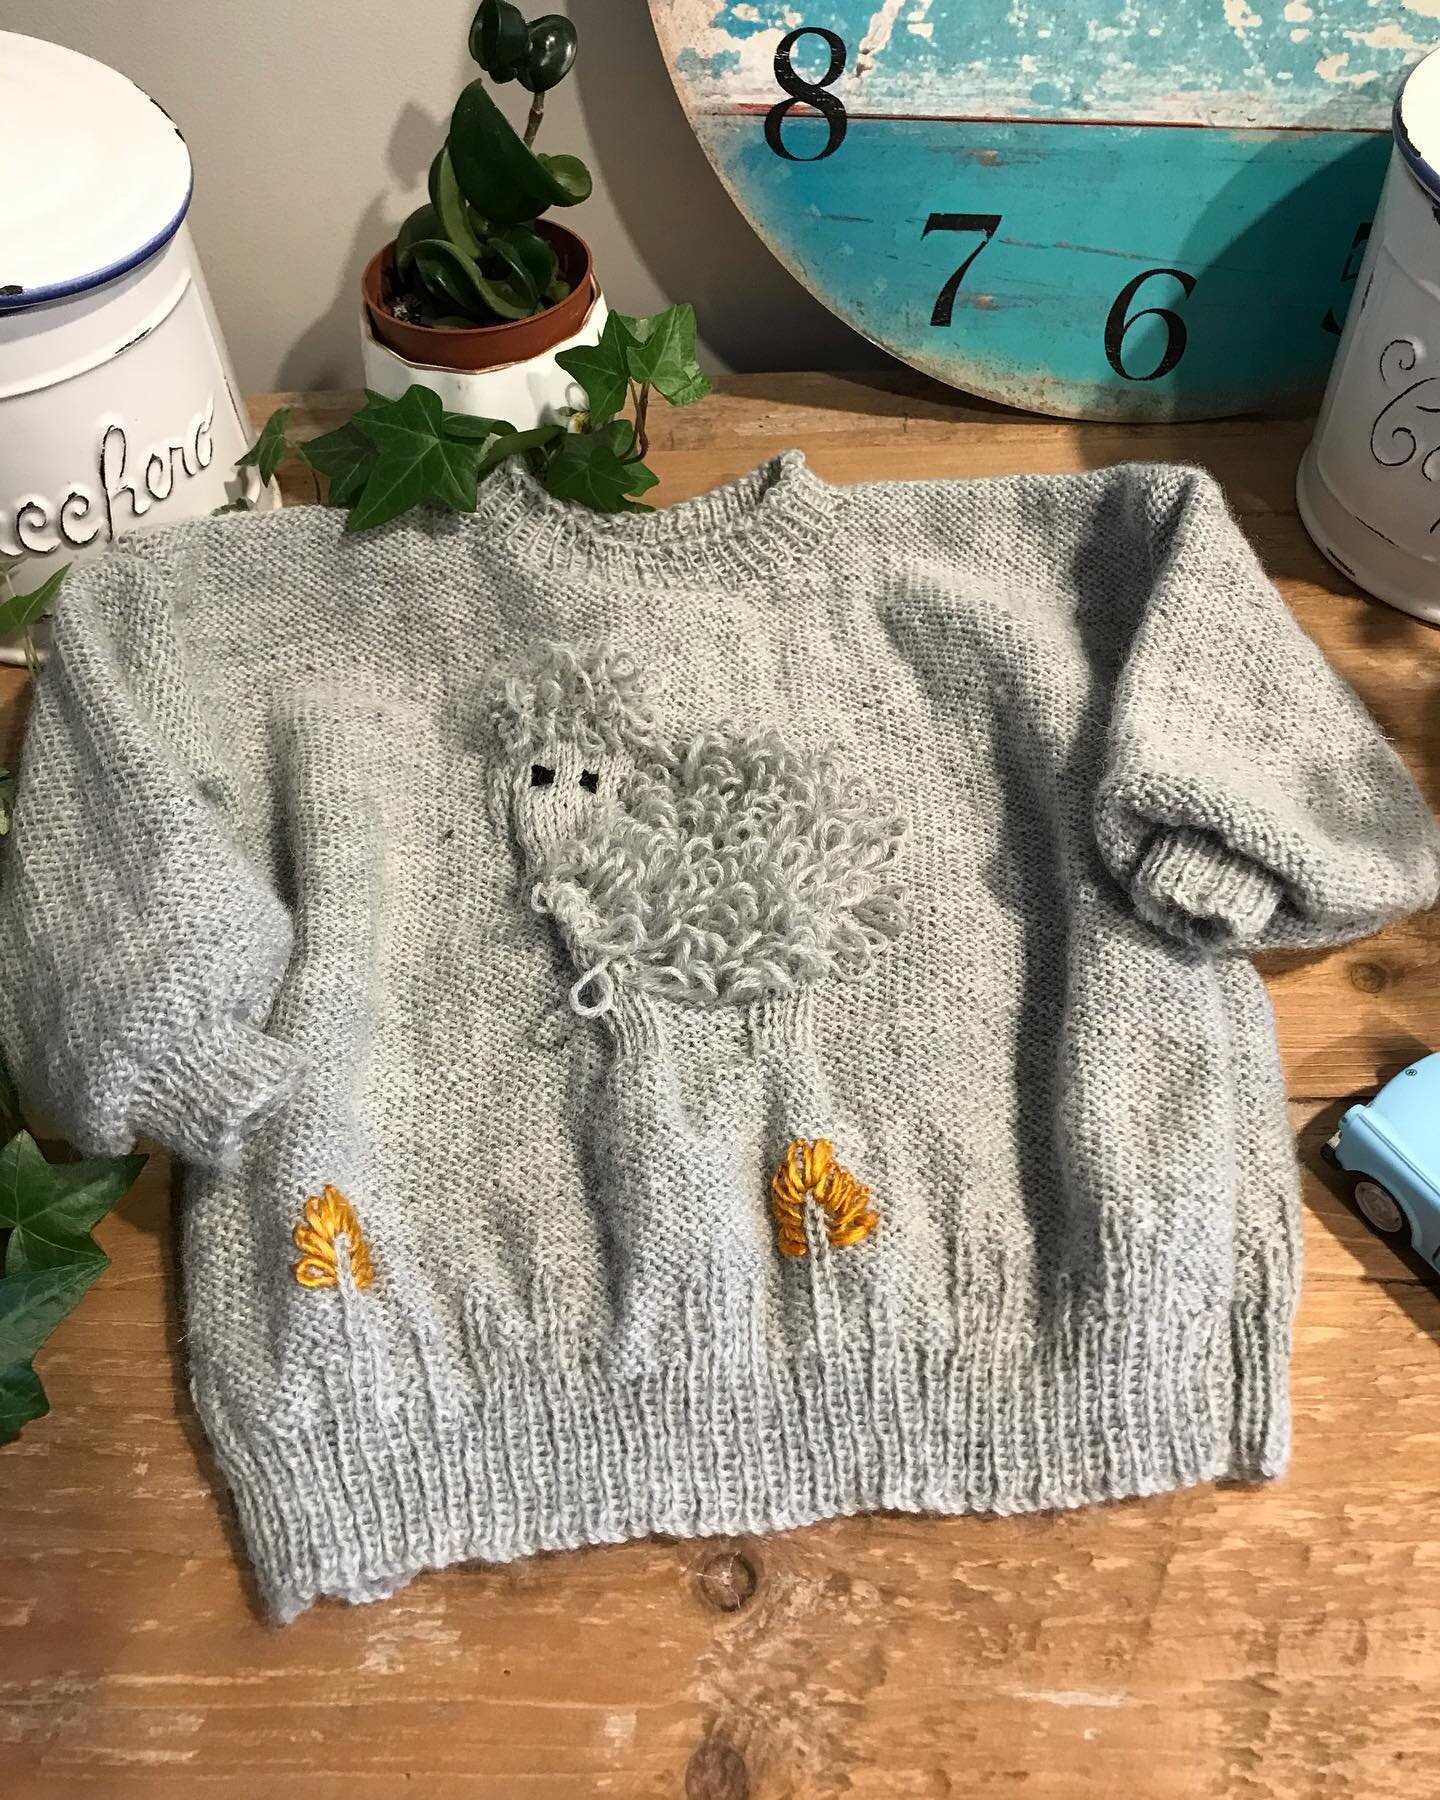 And the jumper is finished.  I added sheep foot prints to the back and embroidered some flowers to both front and back. As soon as I finished the editing of the pattern it will be available on my website. 

#baby #toddler #newborn #gift #knitting #kn